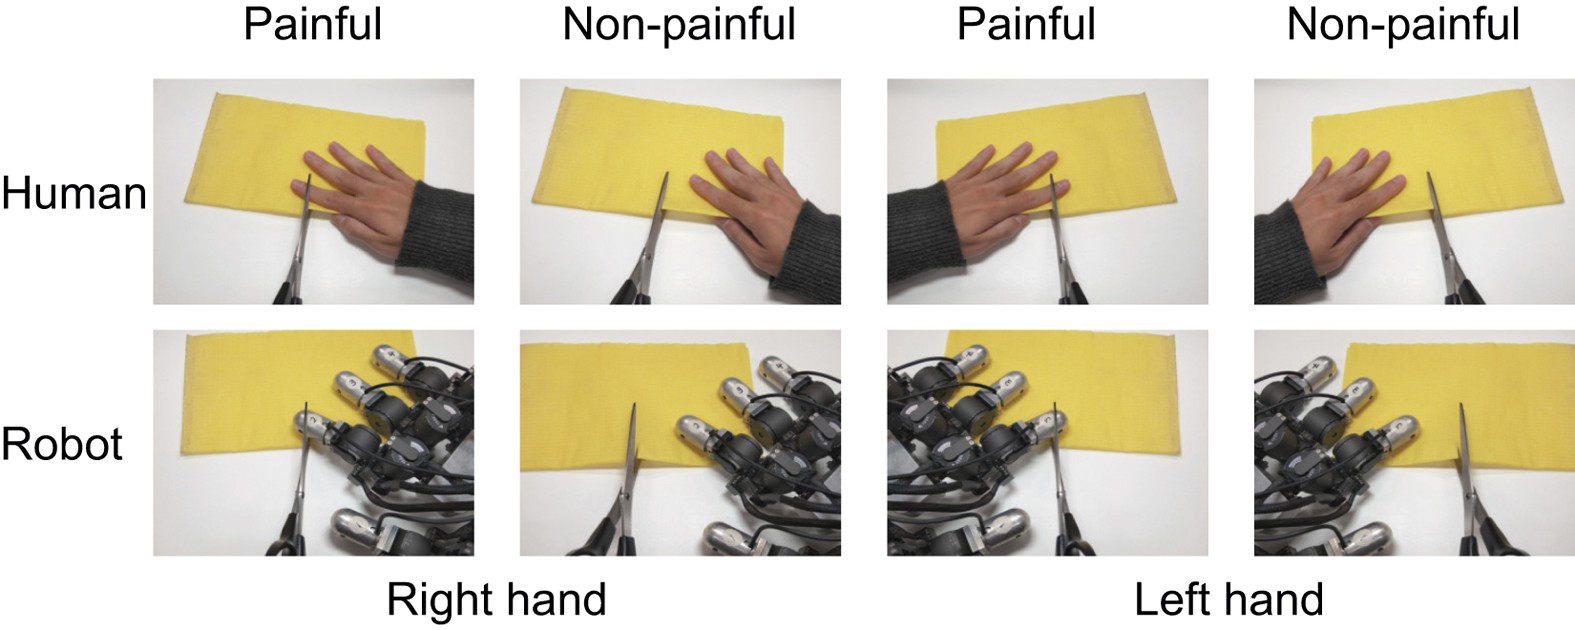 Aftensmad Instruere sovjetisk Measuring empathy for human and robot hand pain using  electroencephalography | Scientific Reports